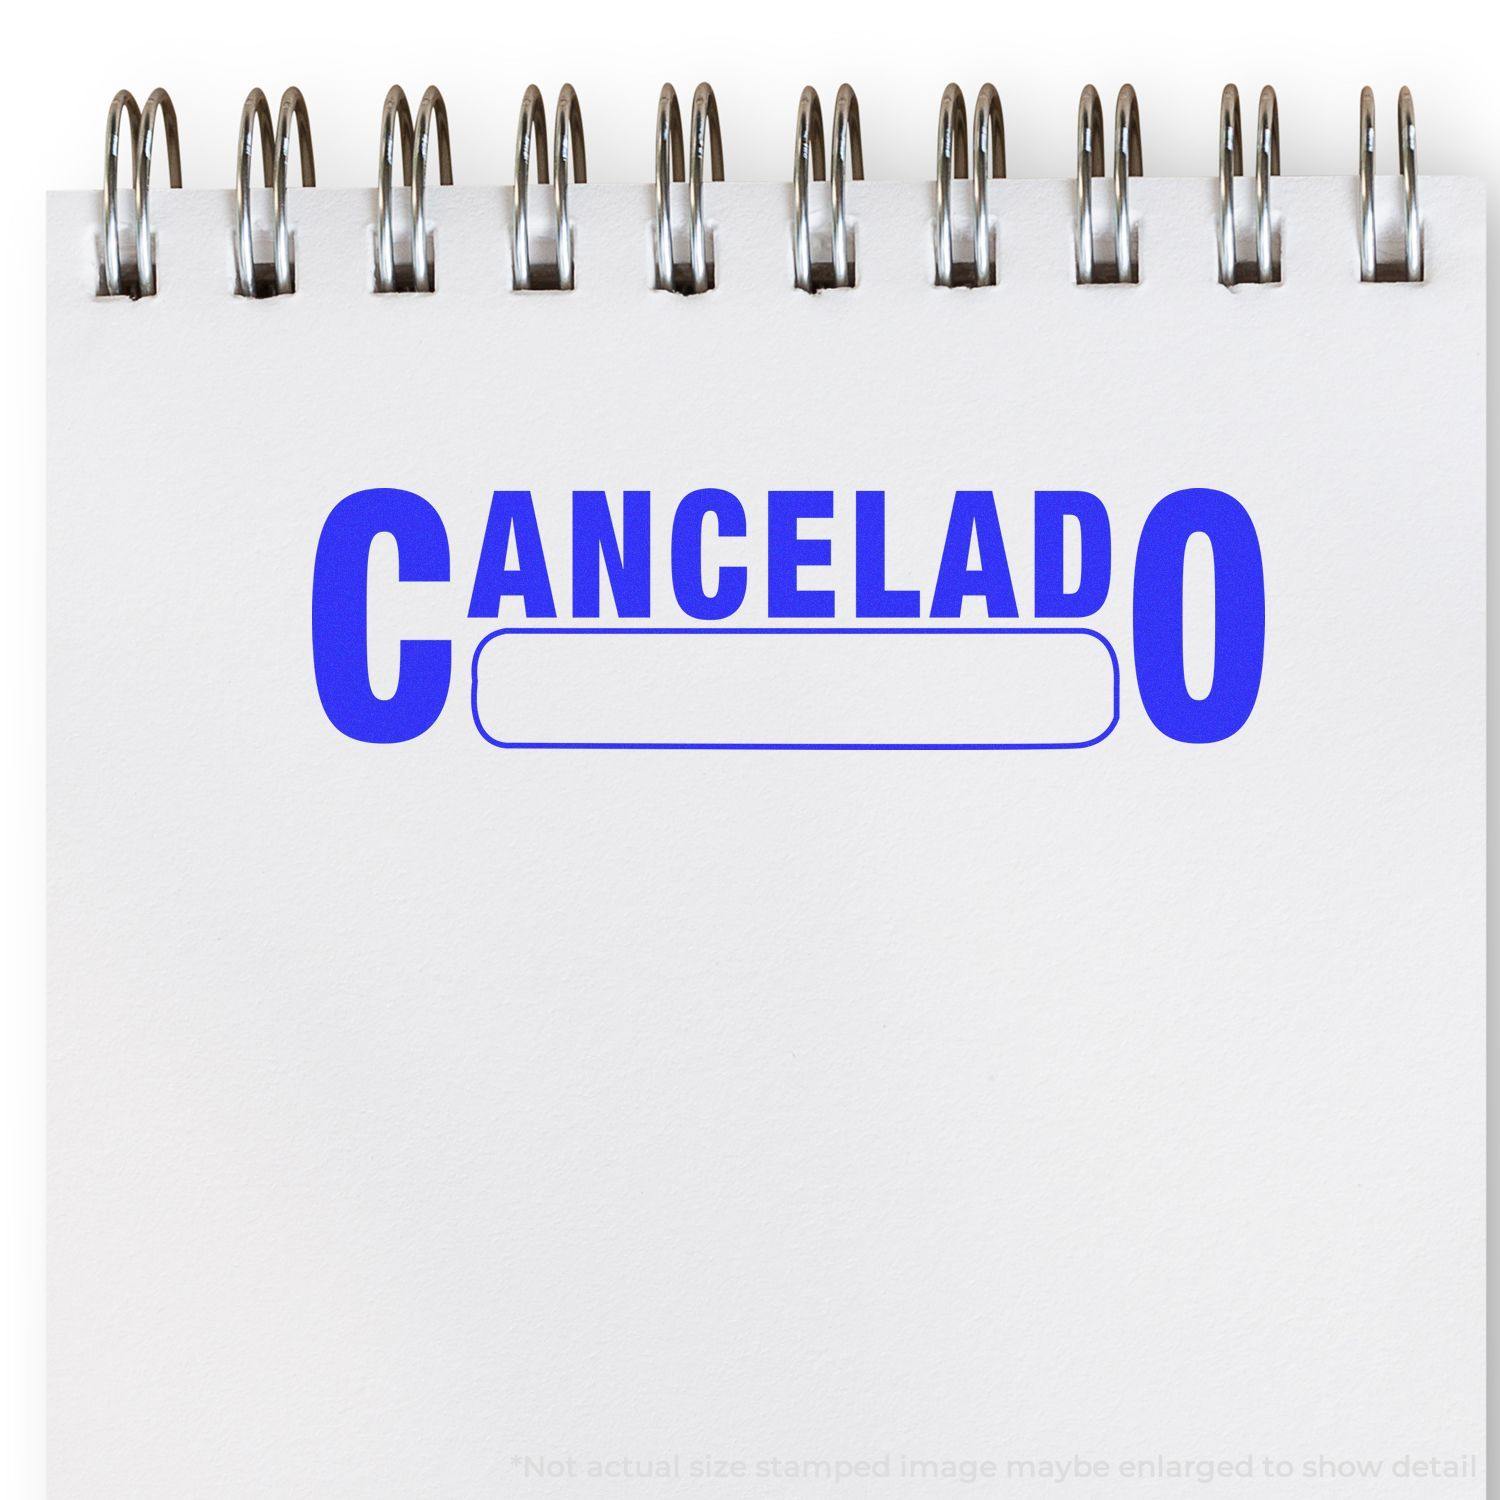 A self-inking stamp with a stamped image showing how the text "CANCELADO" with a box below the text is displayed after stamping.